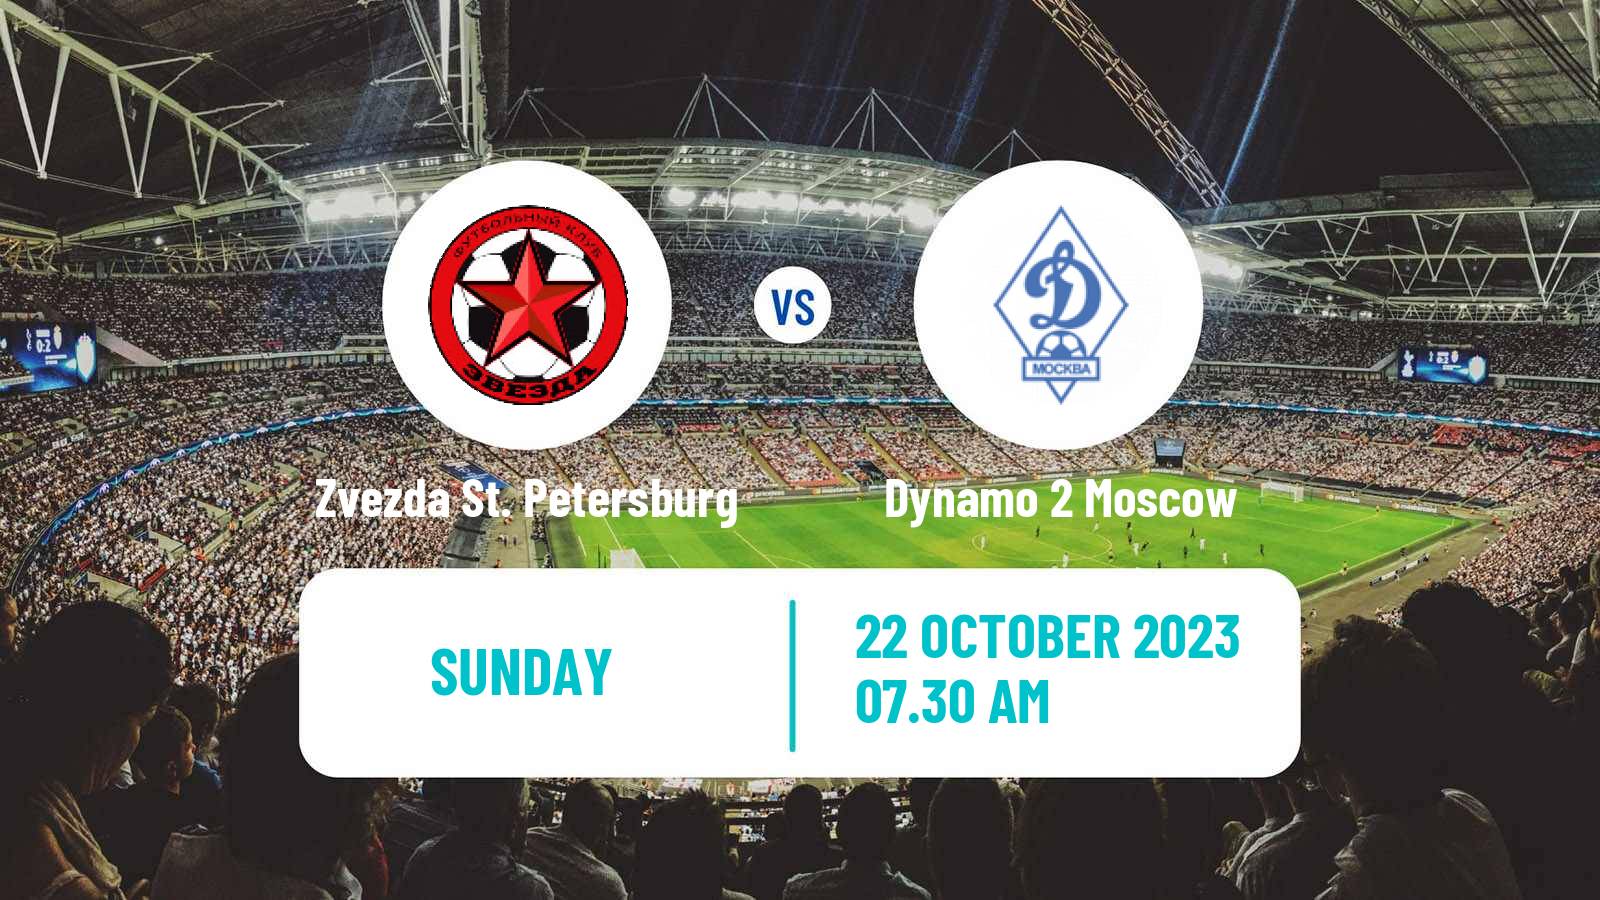 Soccer FNL 2 Division B Group 2 Zvezda St. Petersburg - Dynamo 2 Moscow